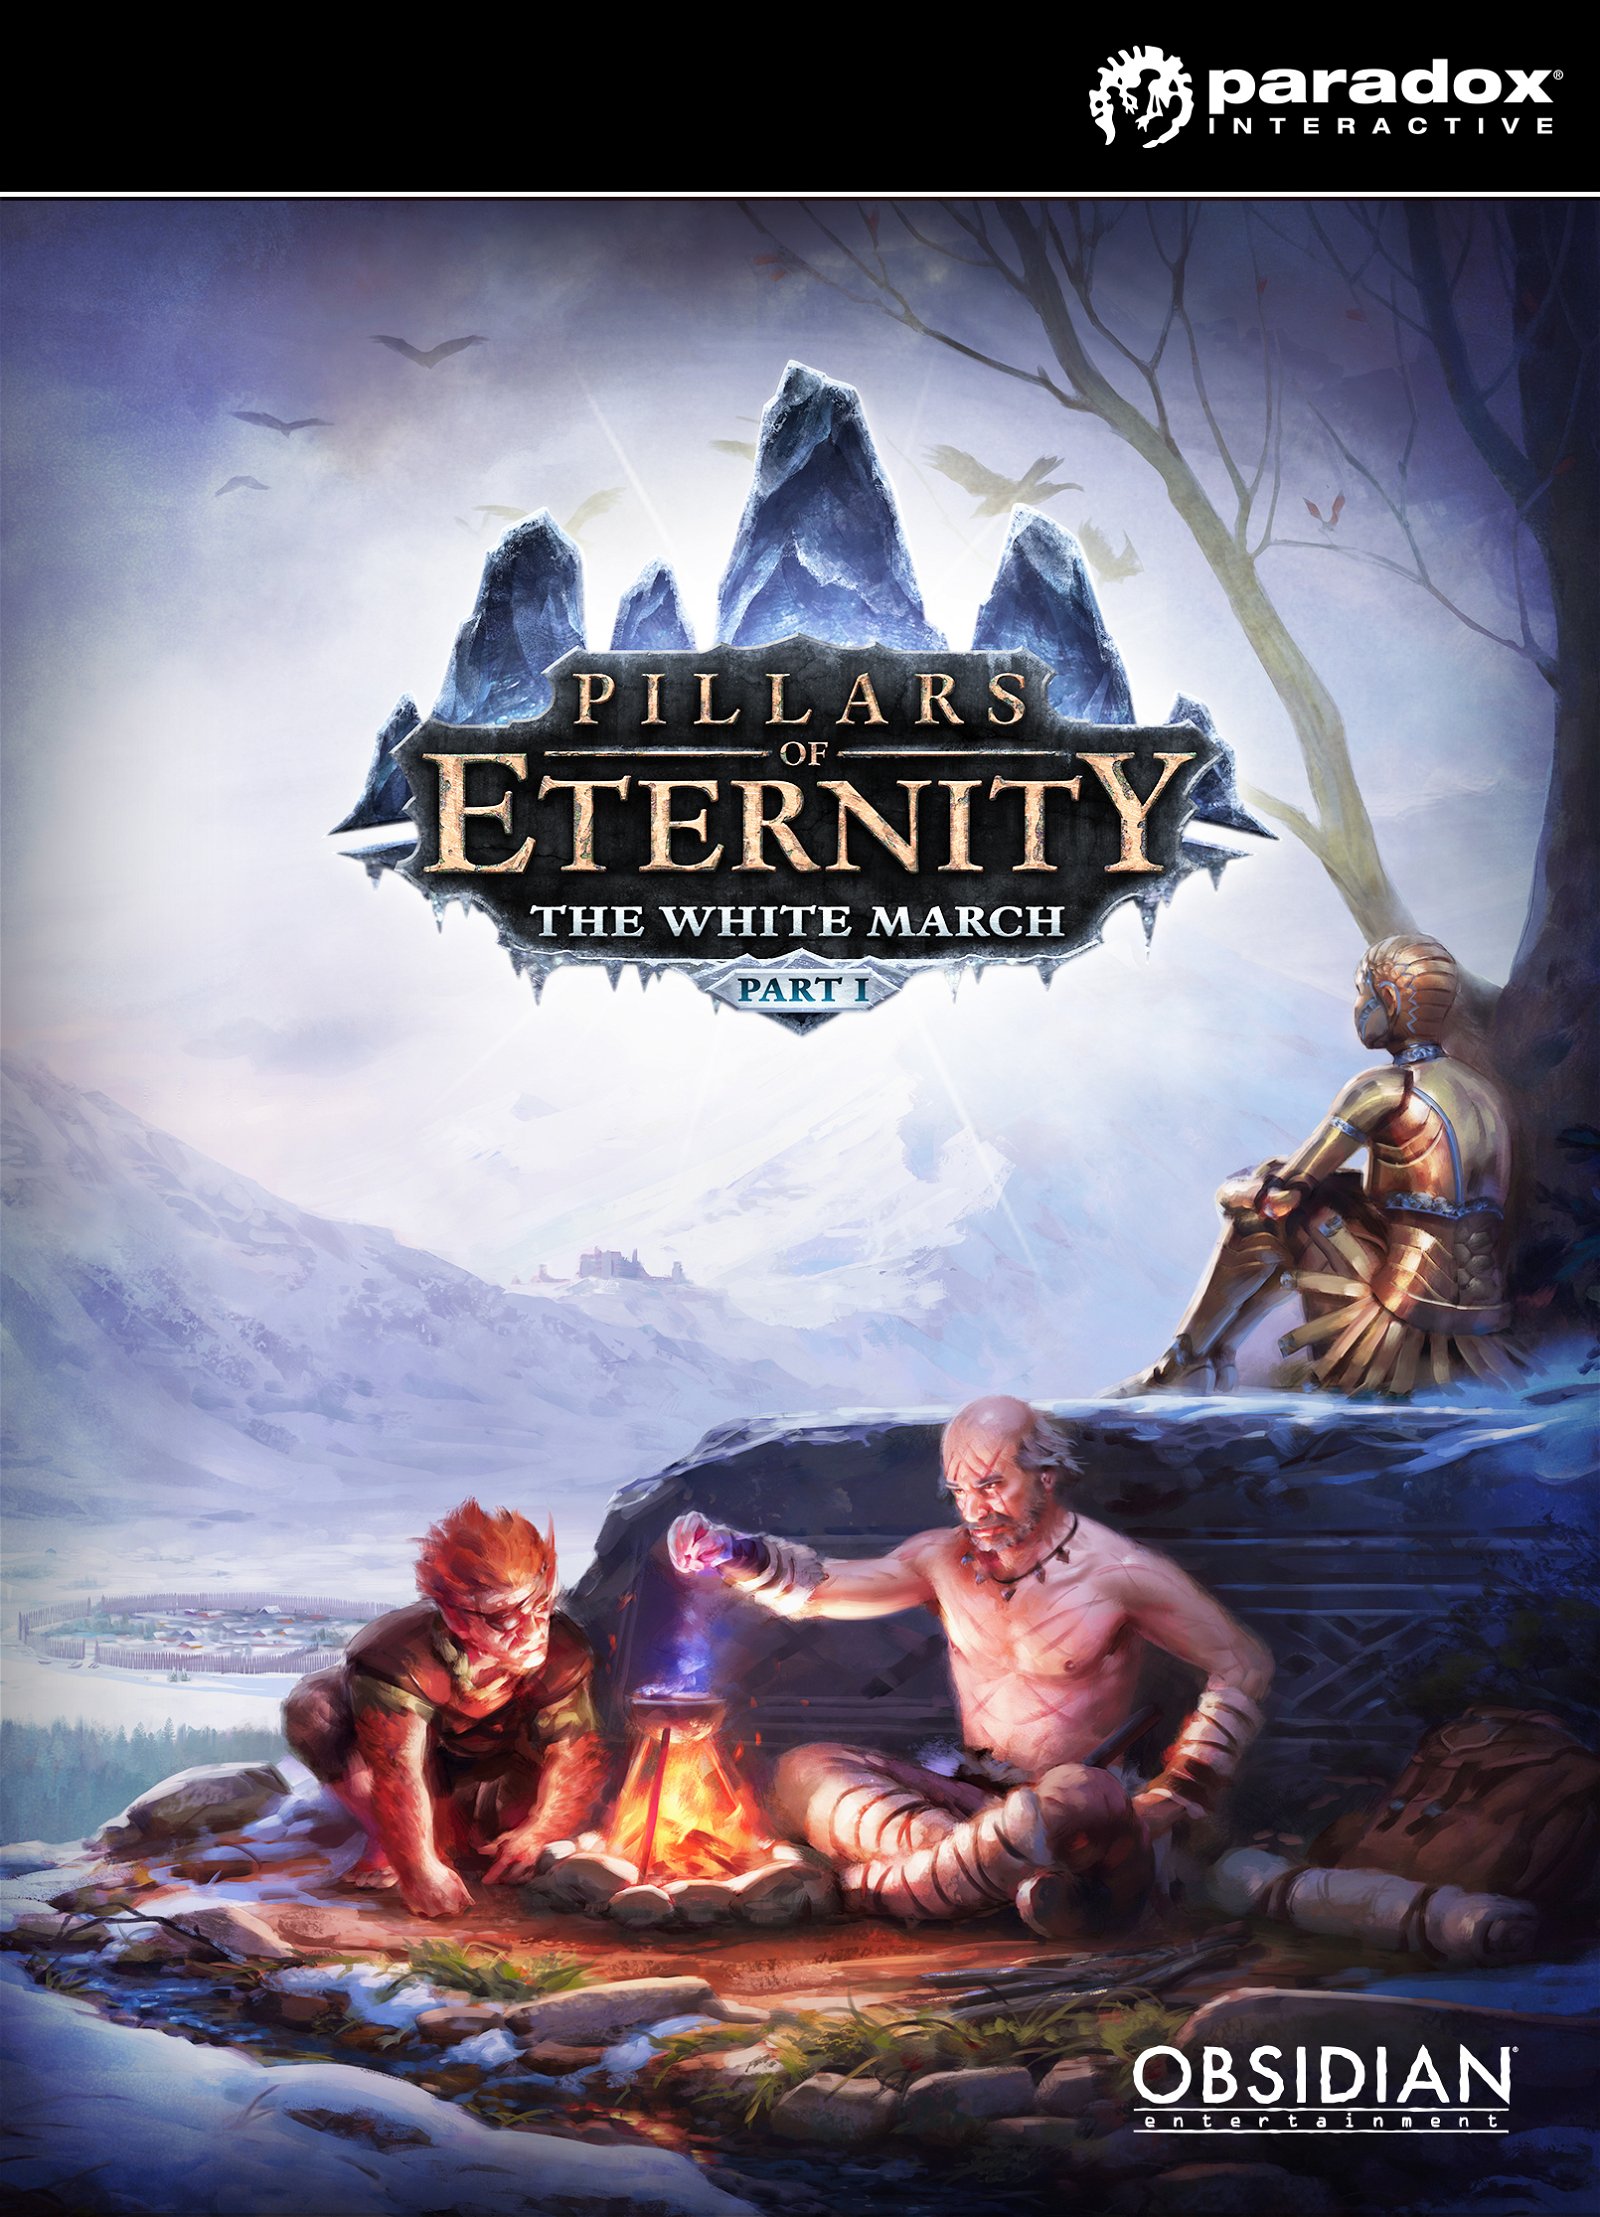 Image of Pillars of Eternity: The White March Part I